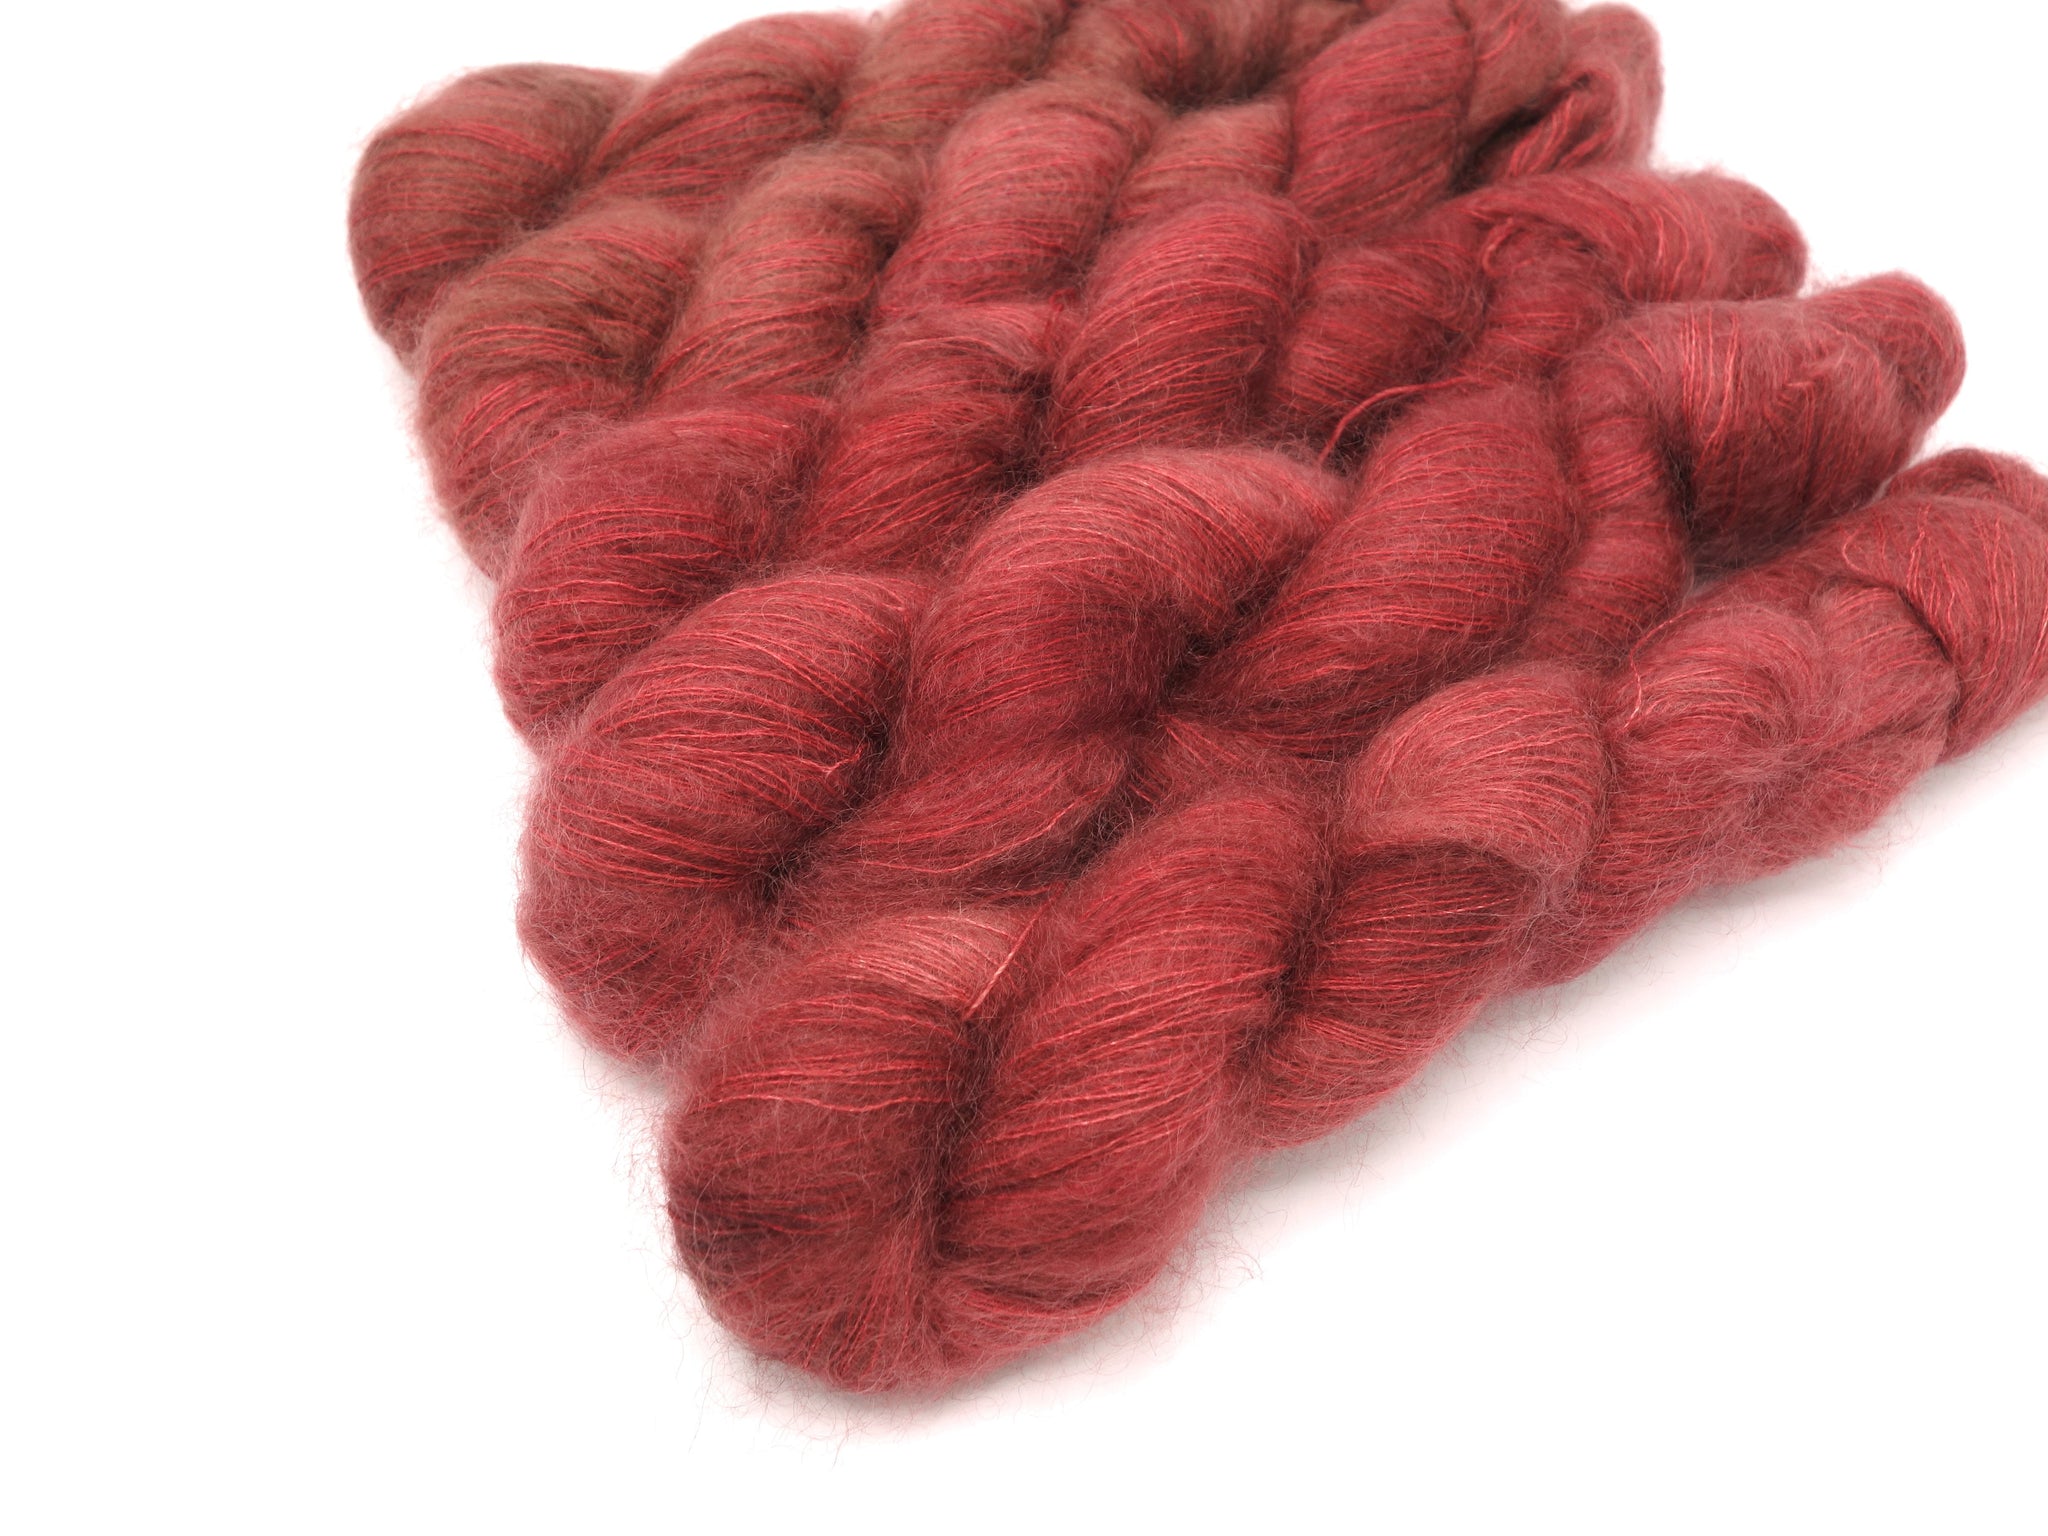 Skeins of Murky Depths Mirage Blood Oath, a red with hints of maroon.